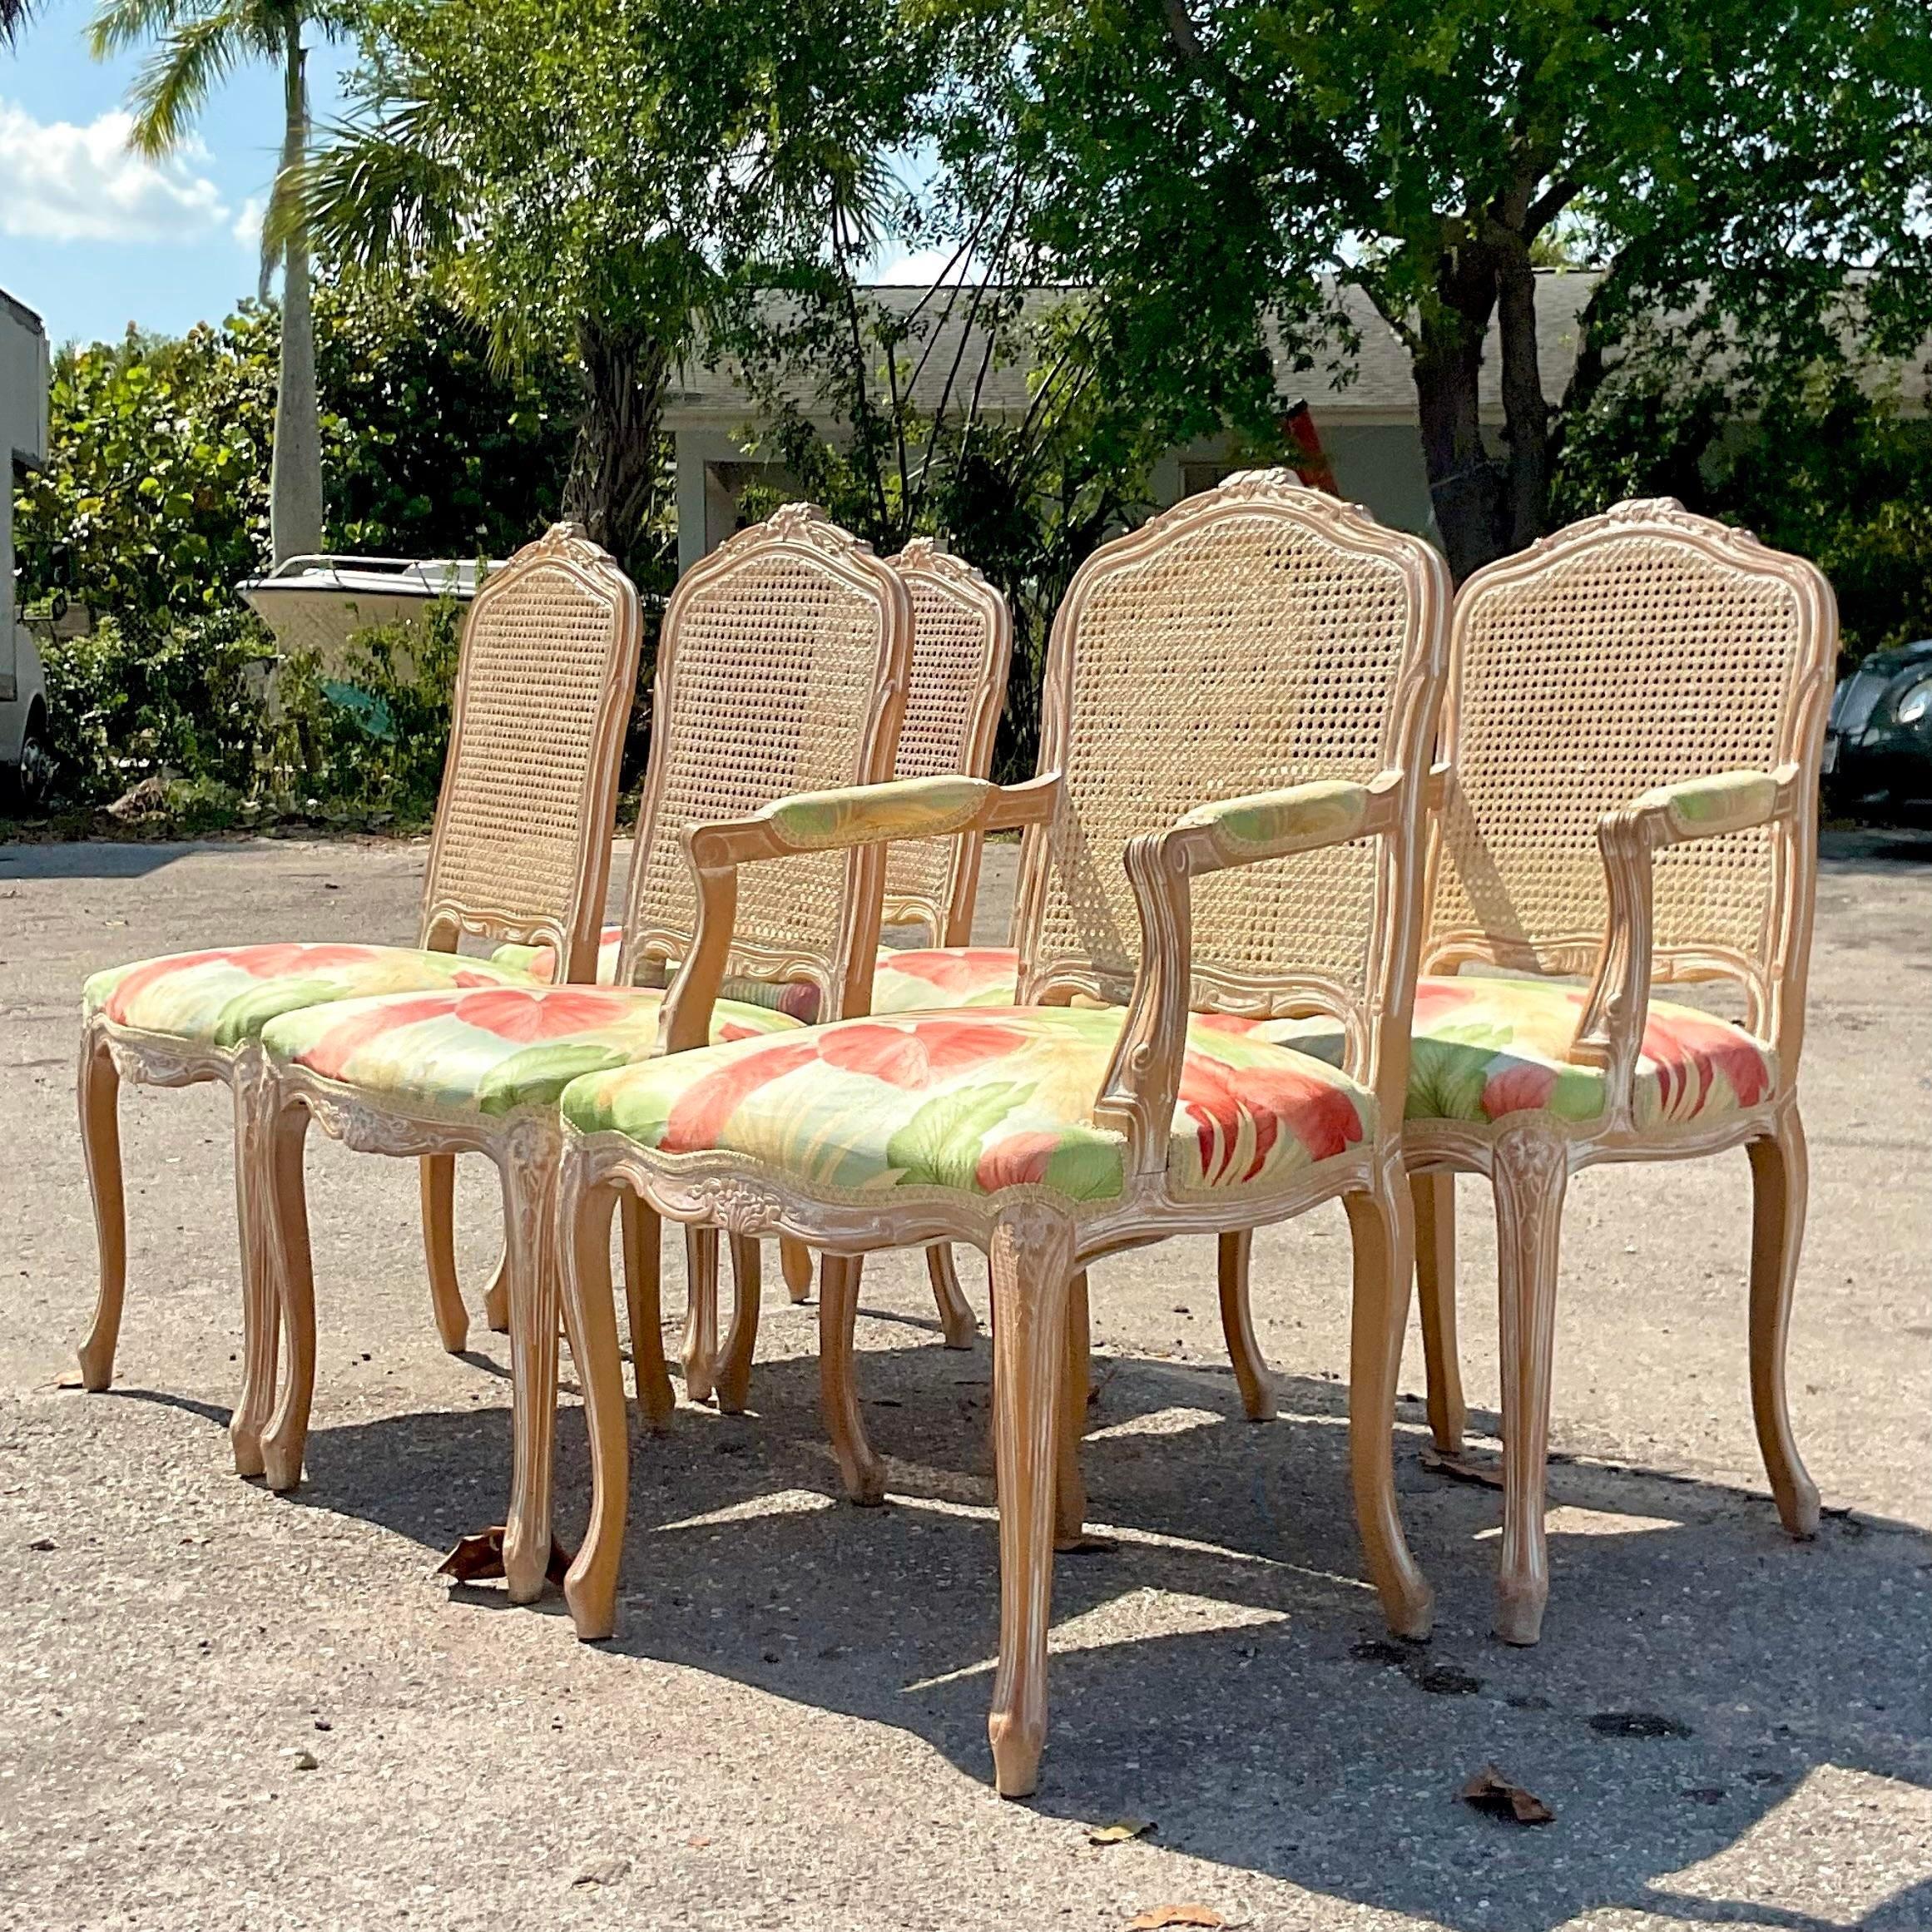 A fantastic set of six vintage Coastal dining chairs. Beautiful Bergere style with a cerused finish and inset cane panels. A bright tropical print on each chair seat. Acquired from a Palm Beach estate.

Arm chair 24.5 wide